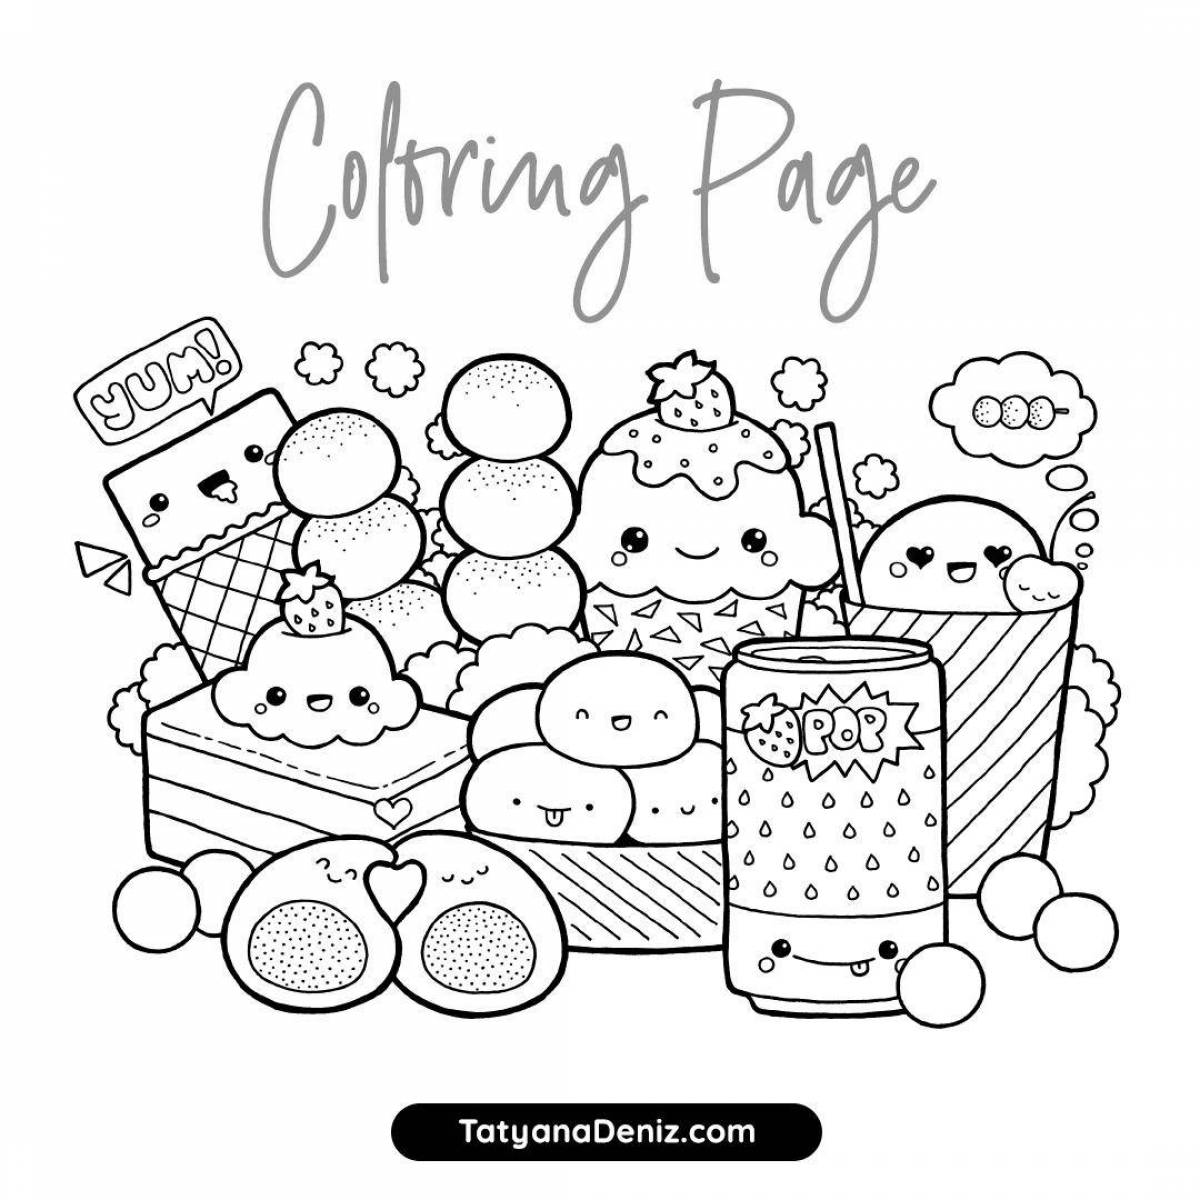 Inviting sweets coloring pages for girls